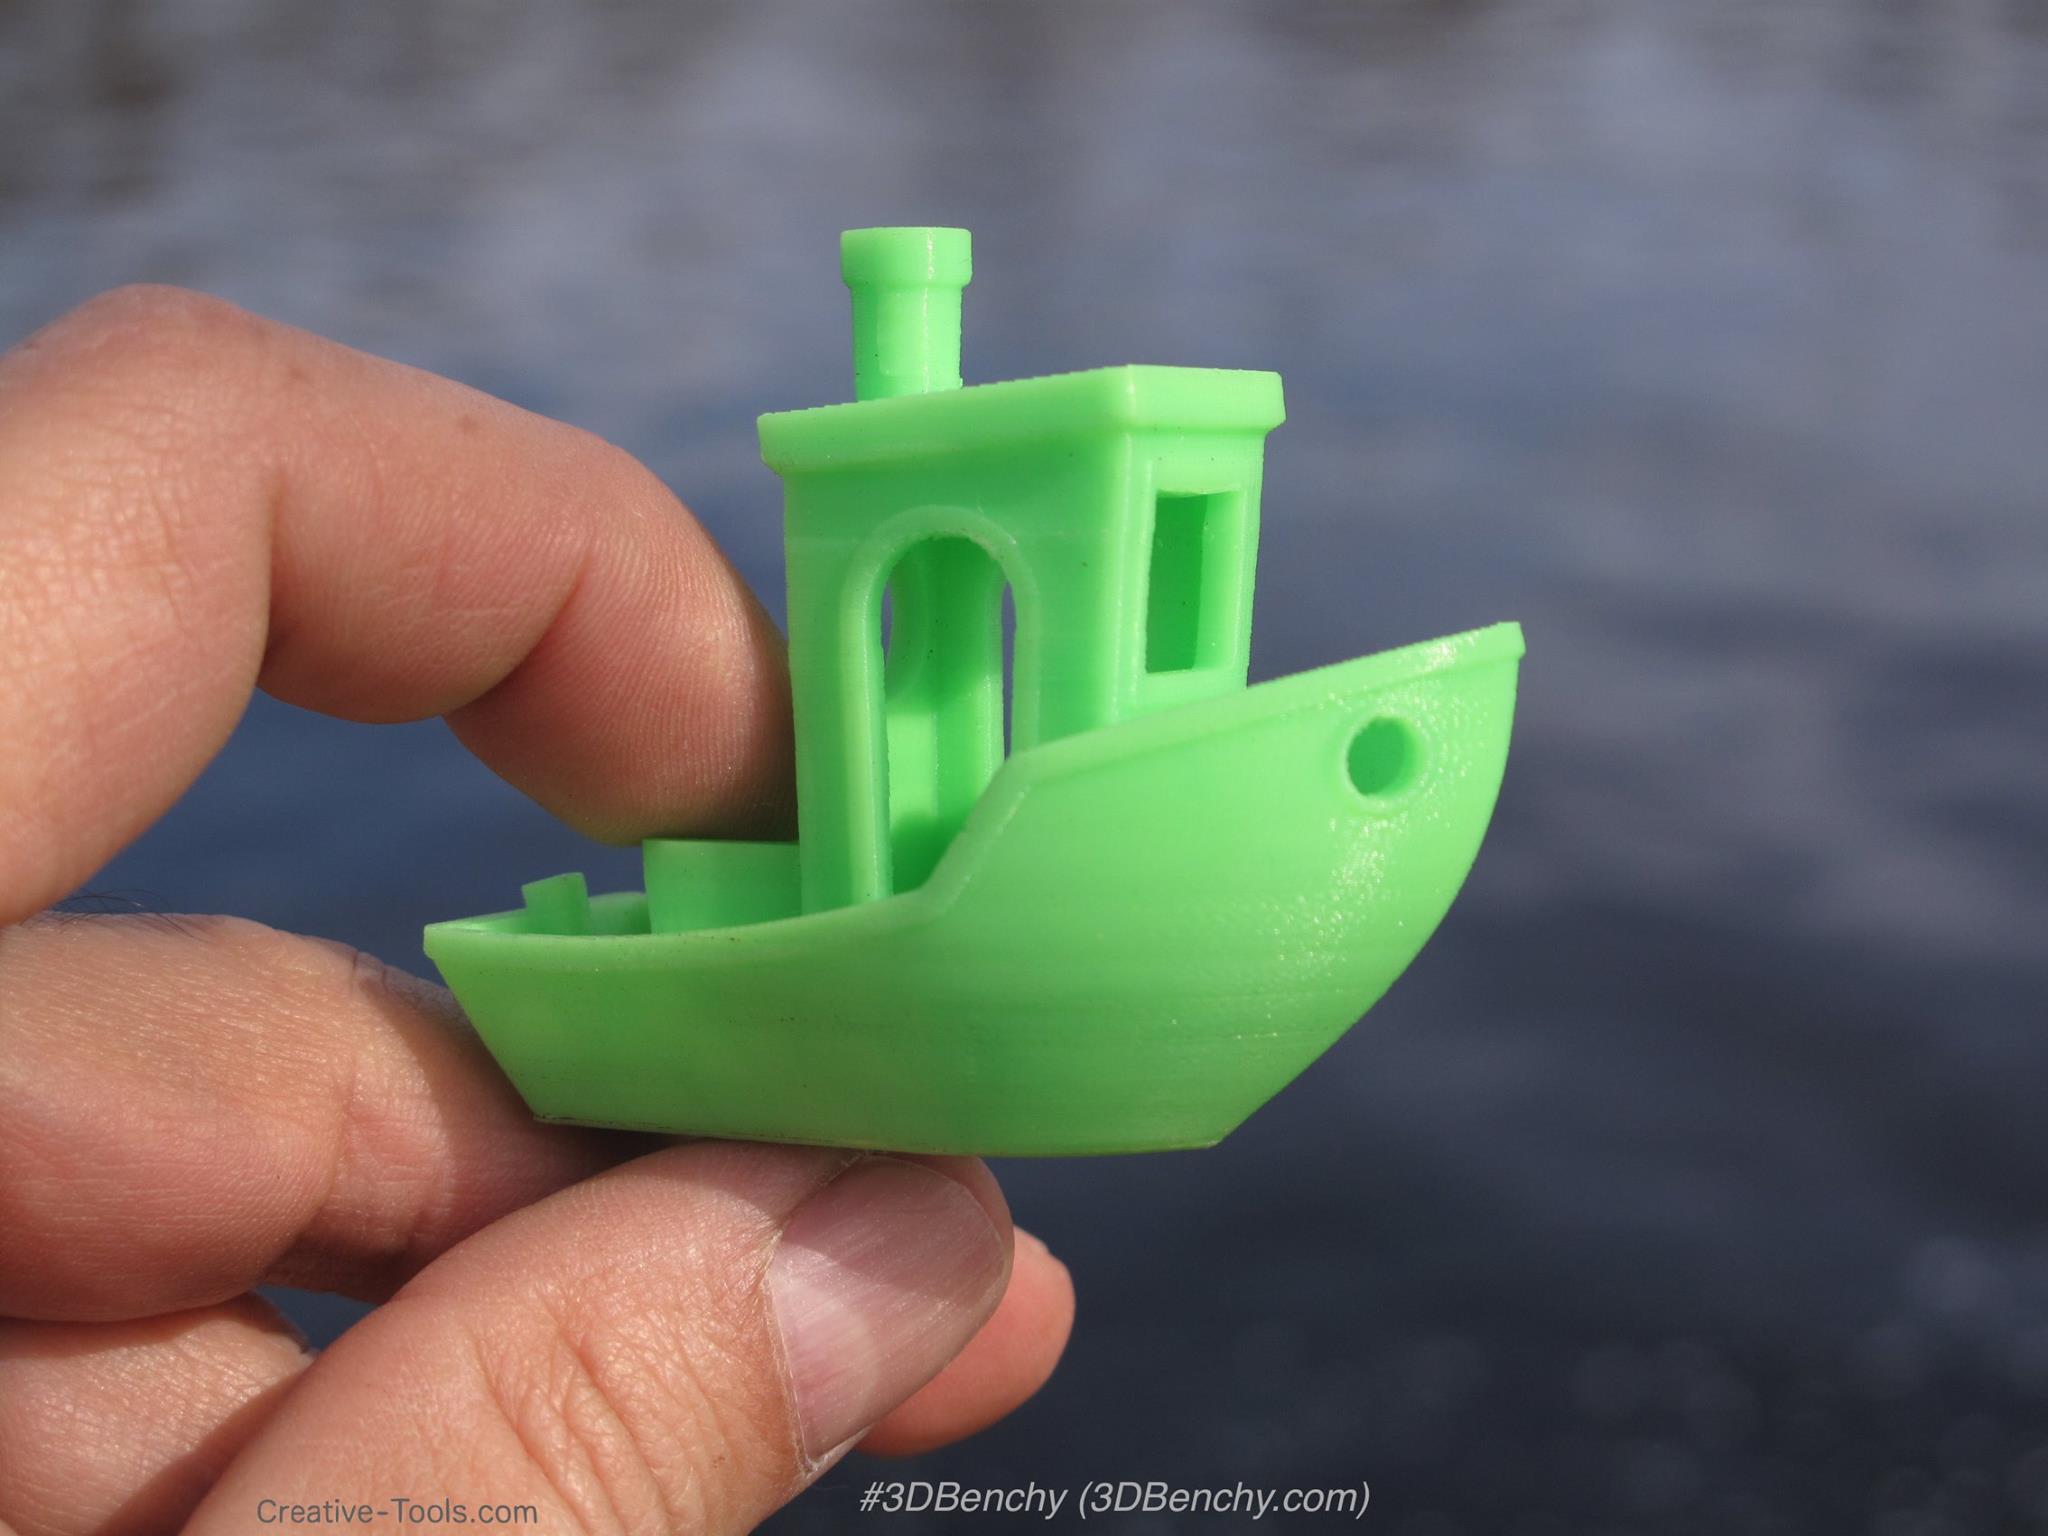 creative-tools-release-3dbenchy-the-coolest-3d-printer-calibration